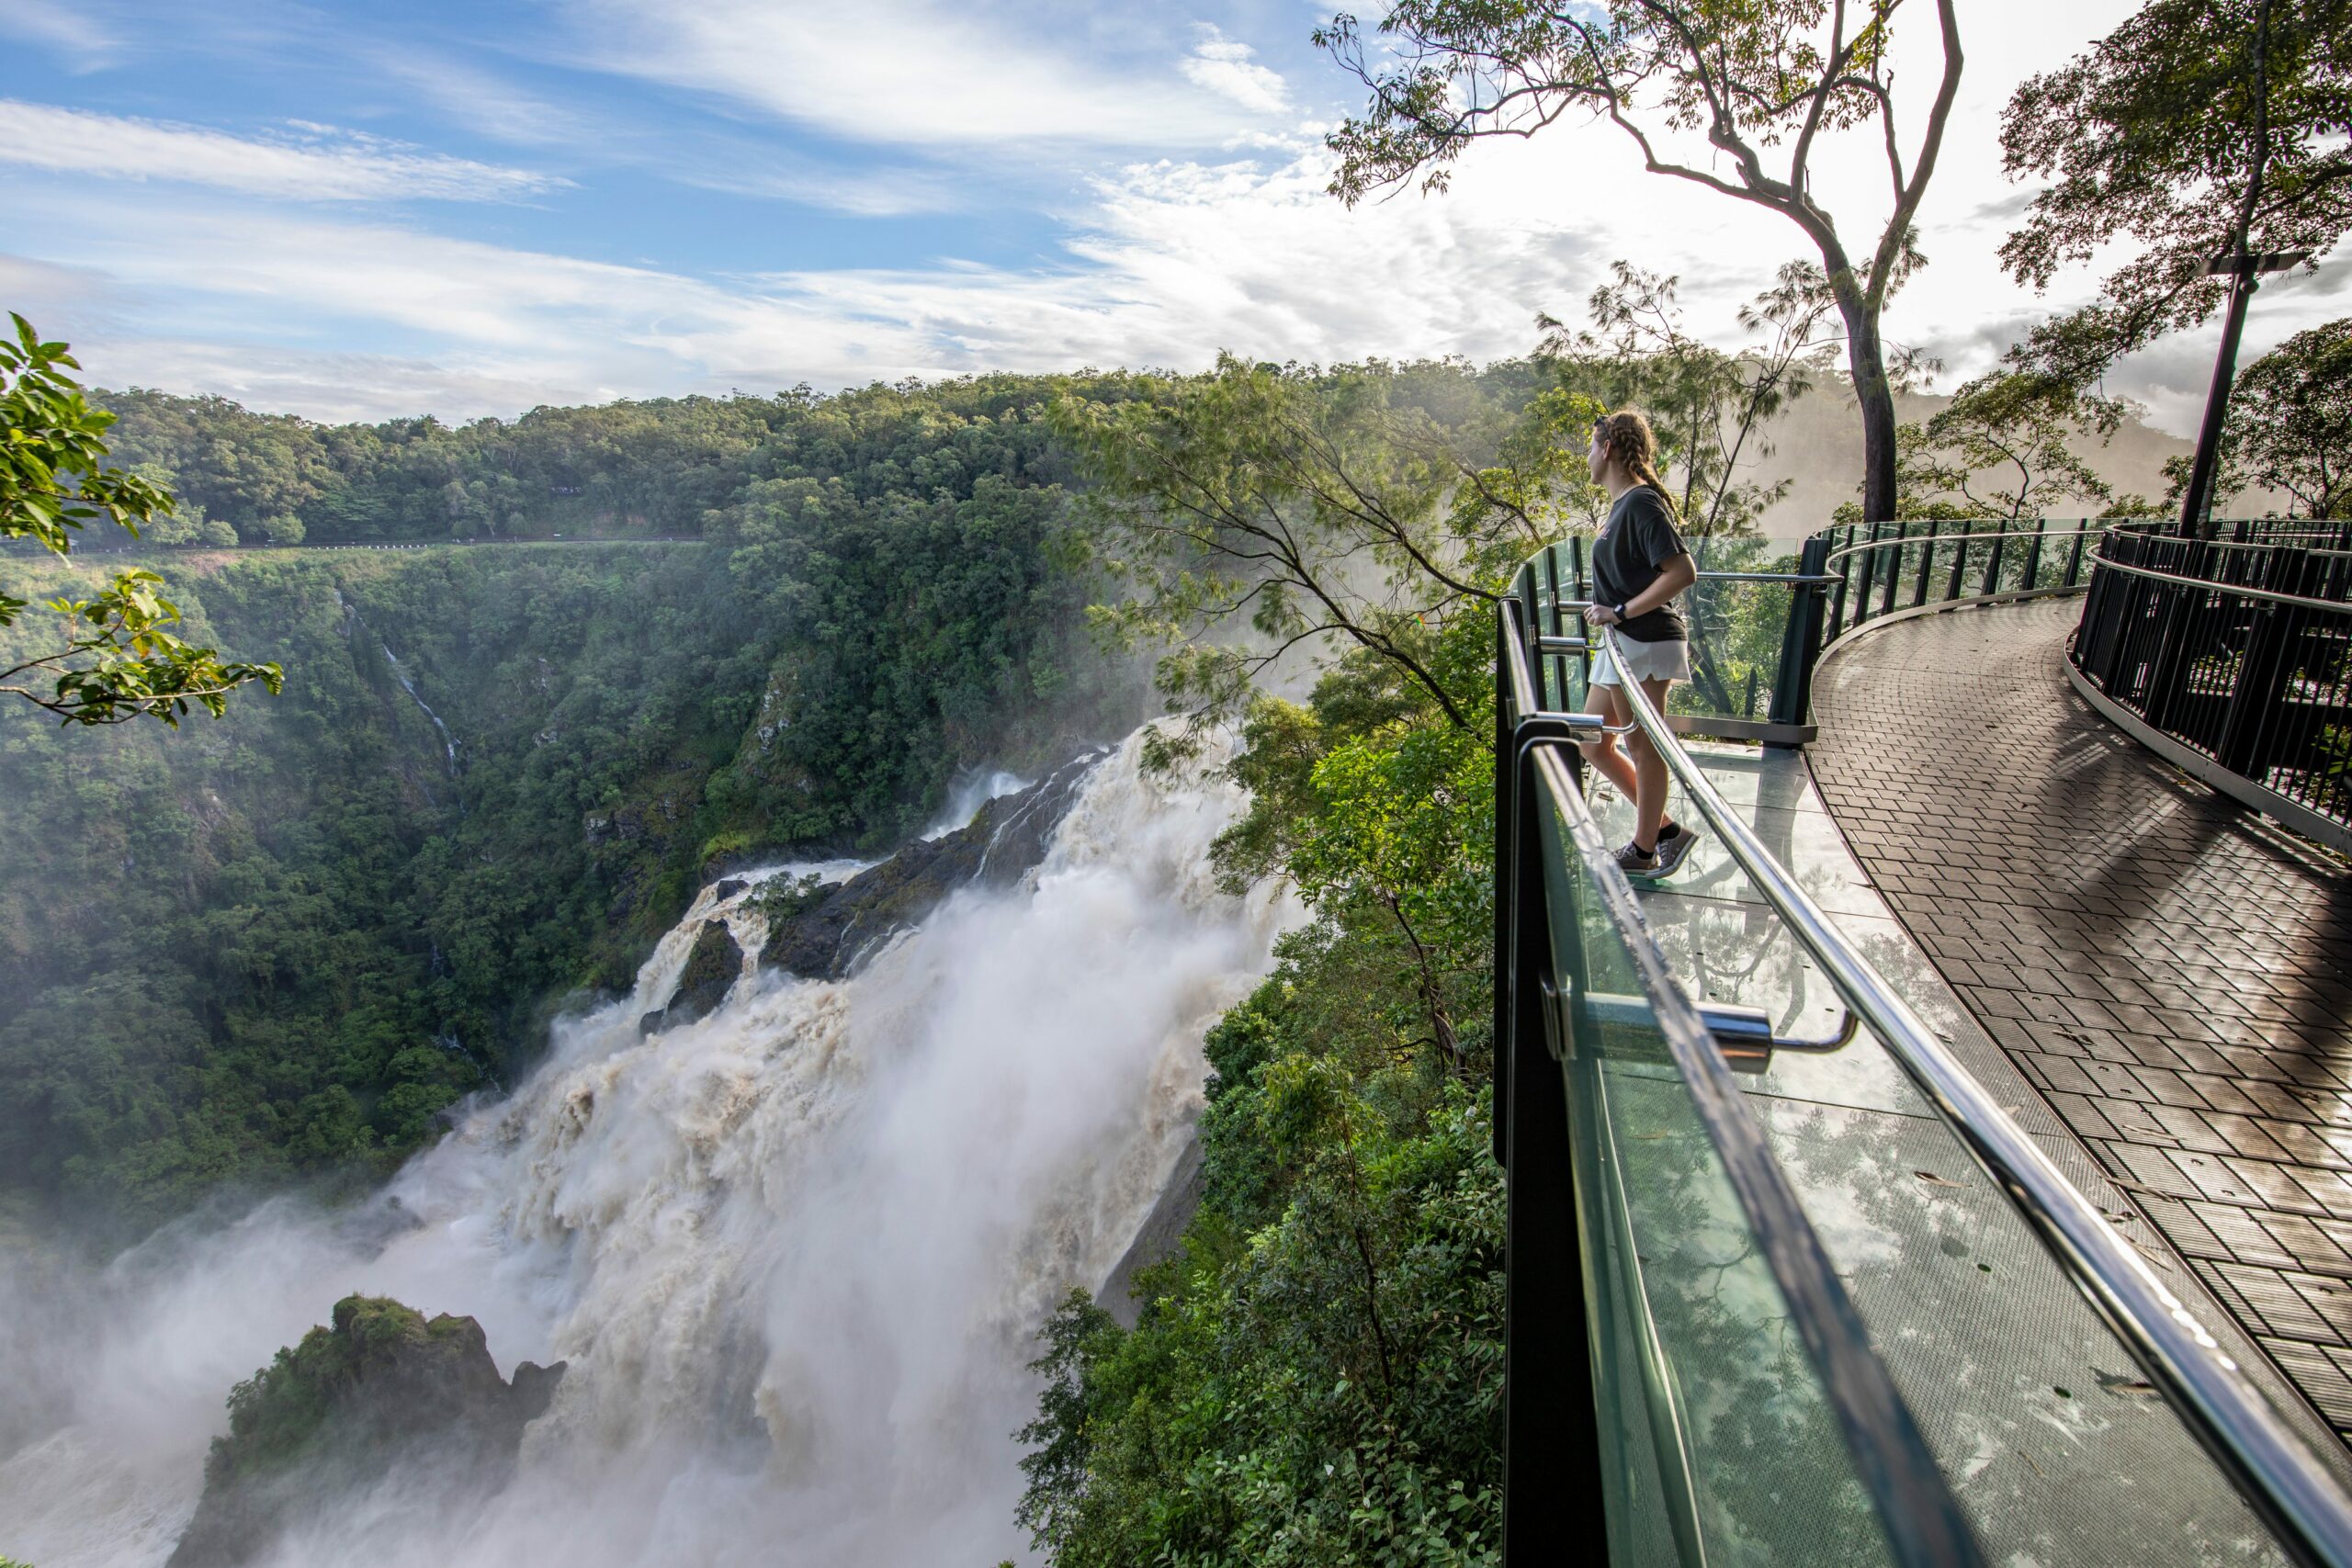 Barron Falls in flood from The Edge Lookout at Skyrail | Photo by Phlipvids